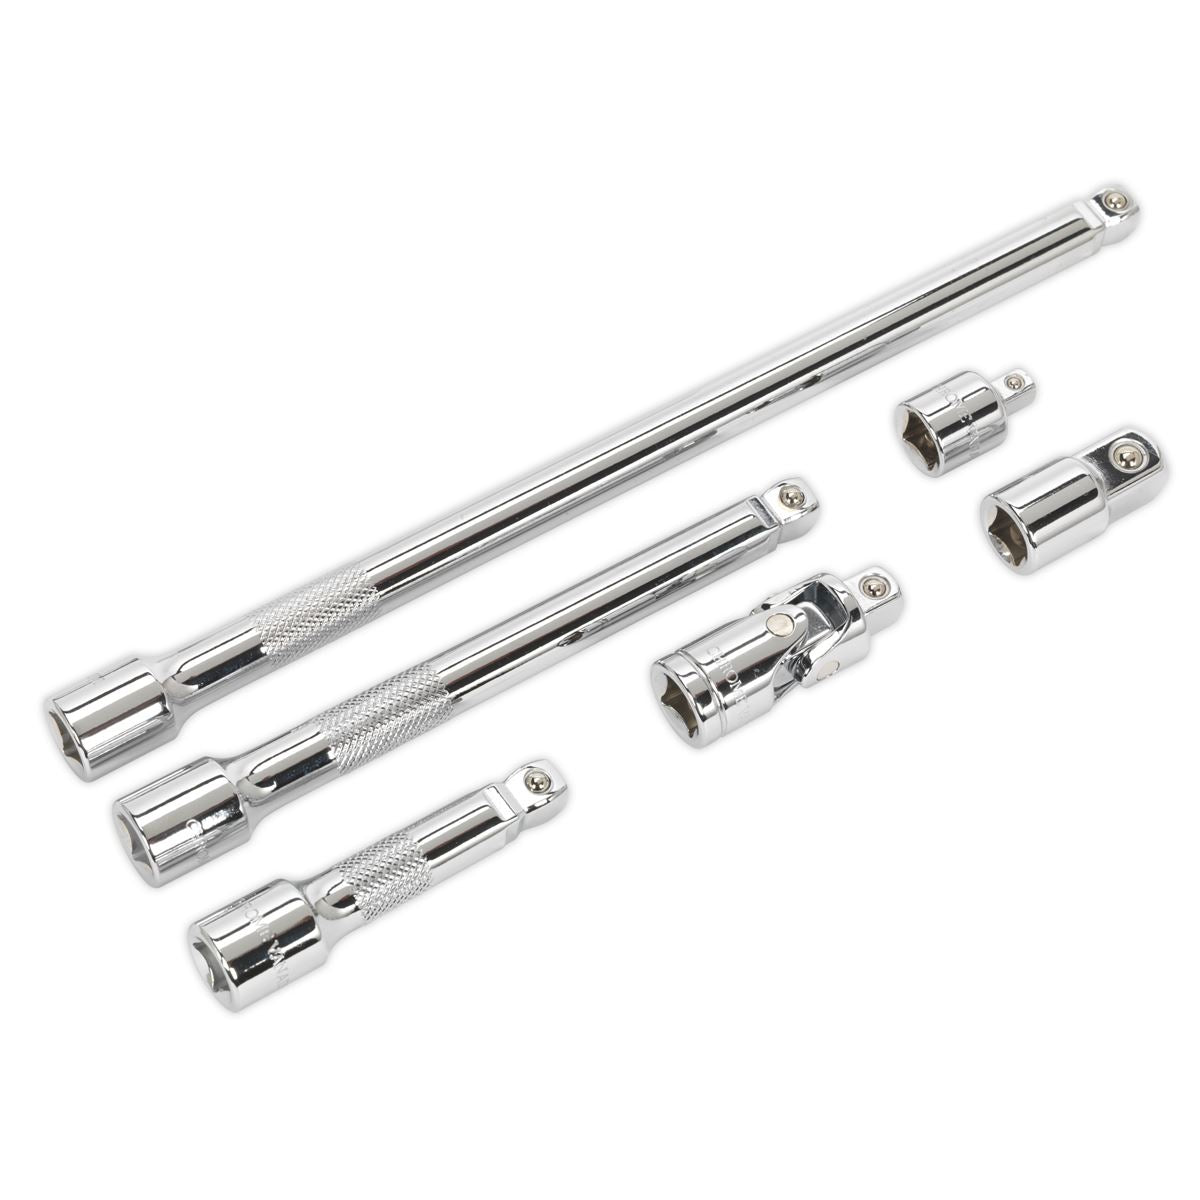 Sealey Premier 6 Piece 3/8" Drive Wobble Extension Bar, Adaptor and Universal Joint Set